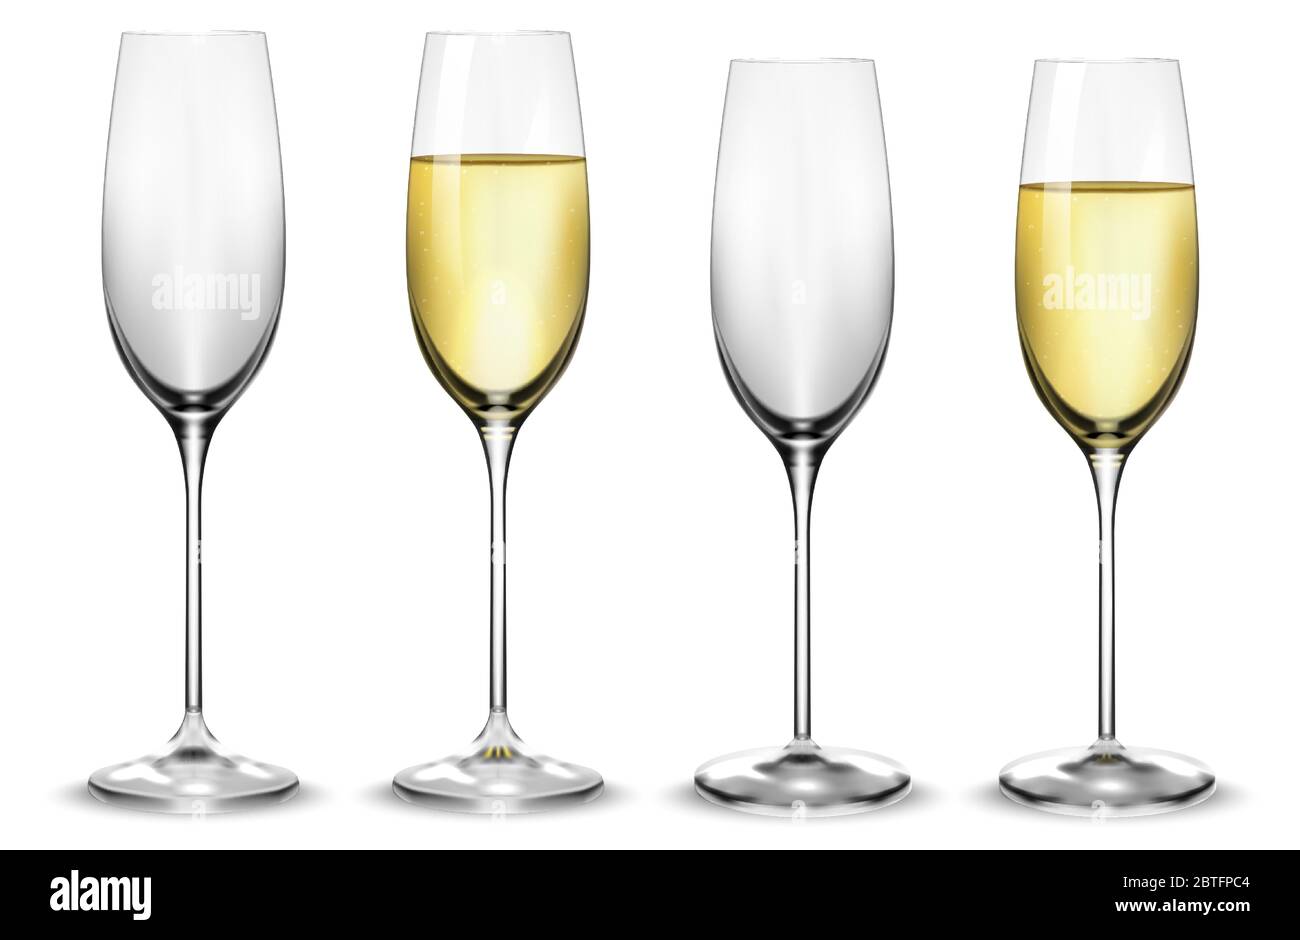 Glasses Of White Wine On Table by Foodcollection Rf